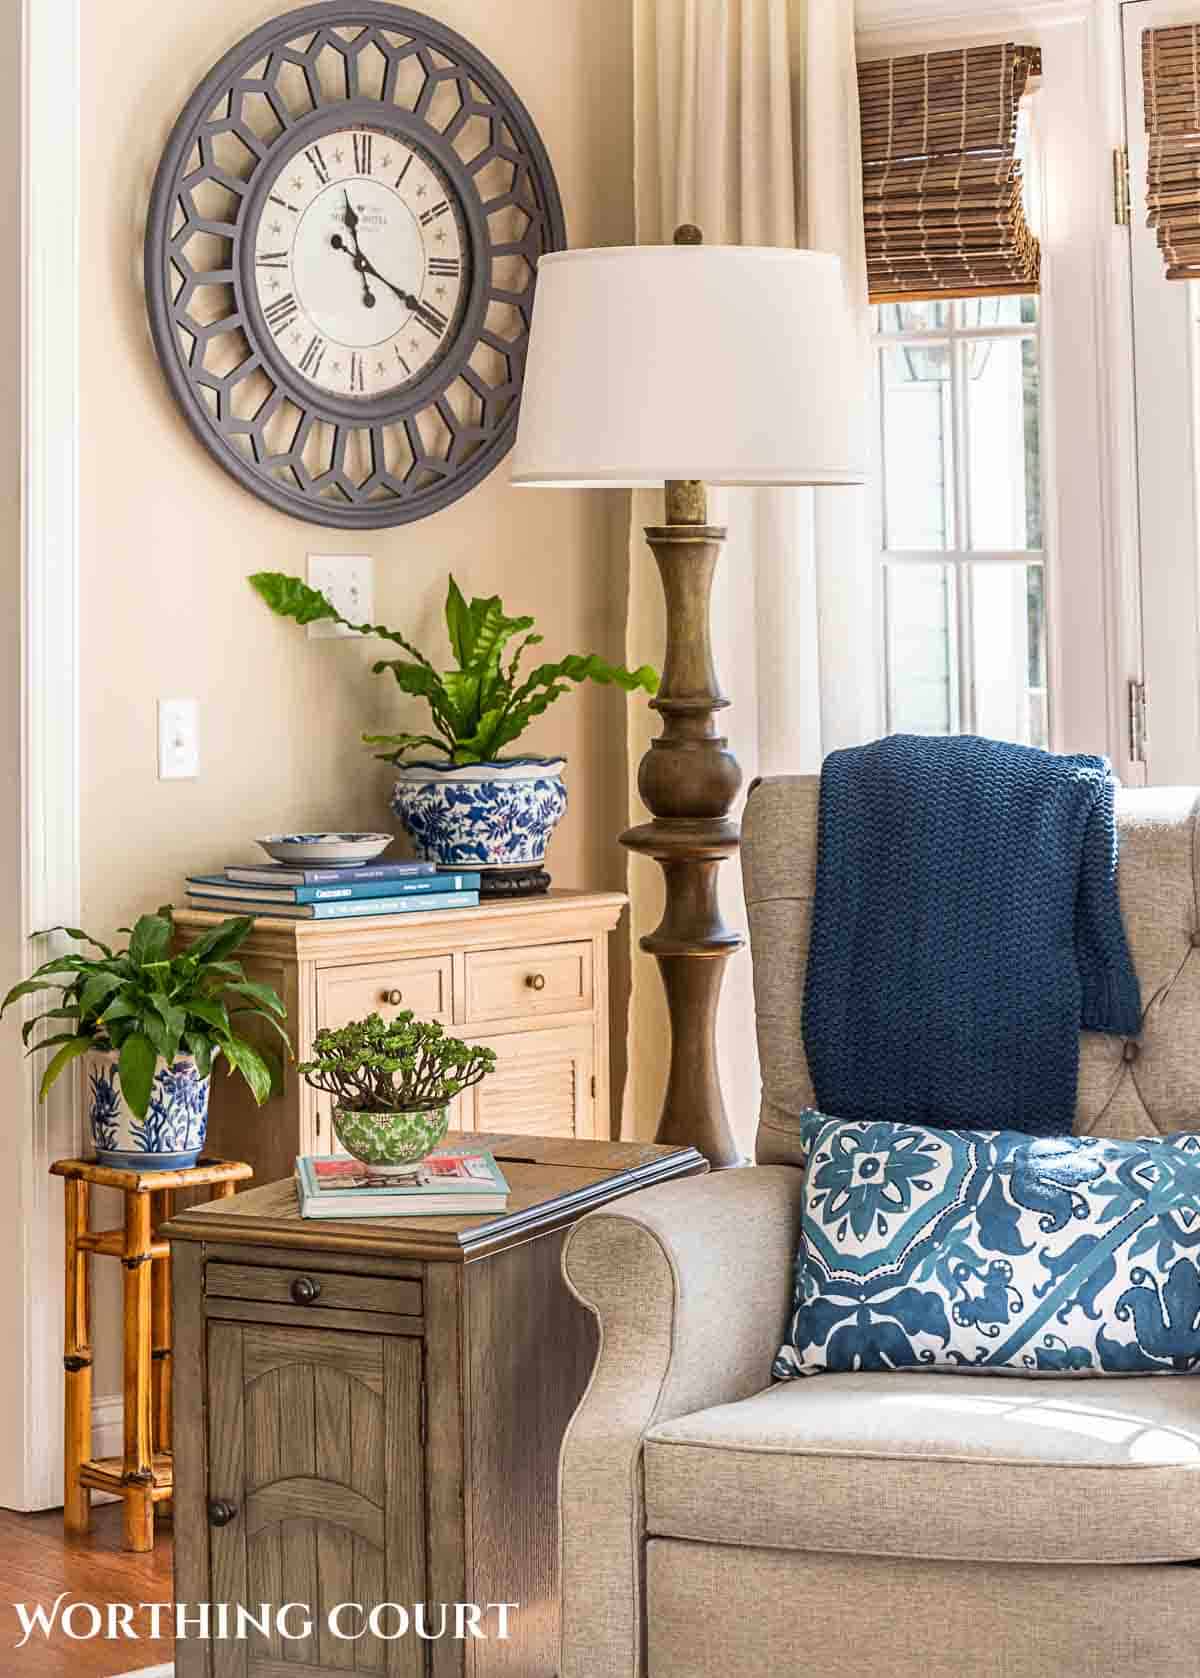 living room wall with large clock for wall art behind gray recliner and end table with accessories